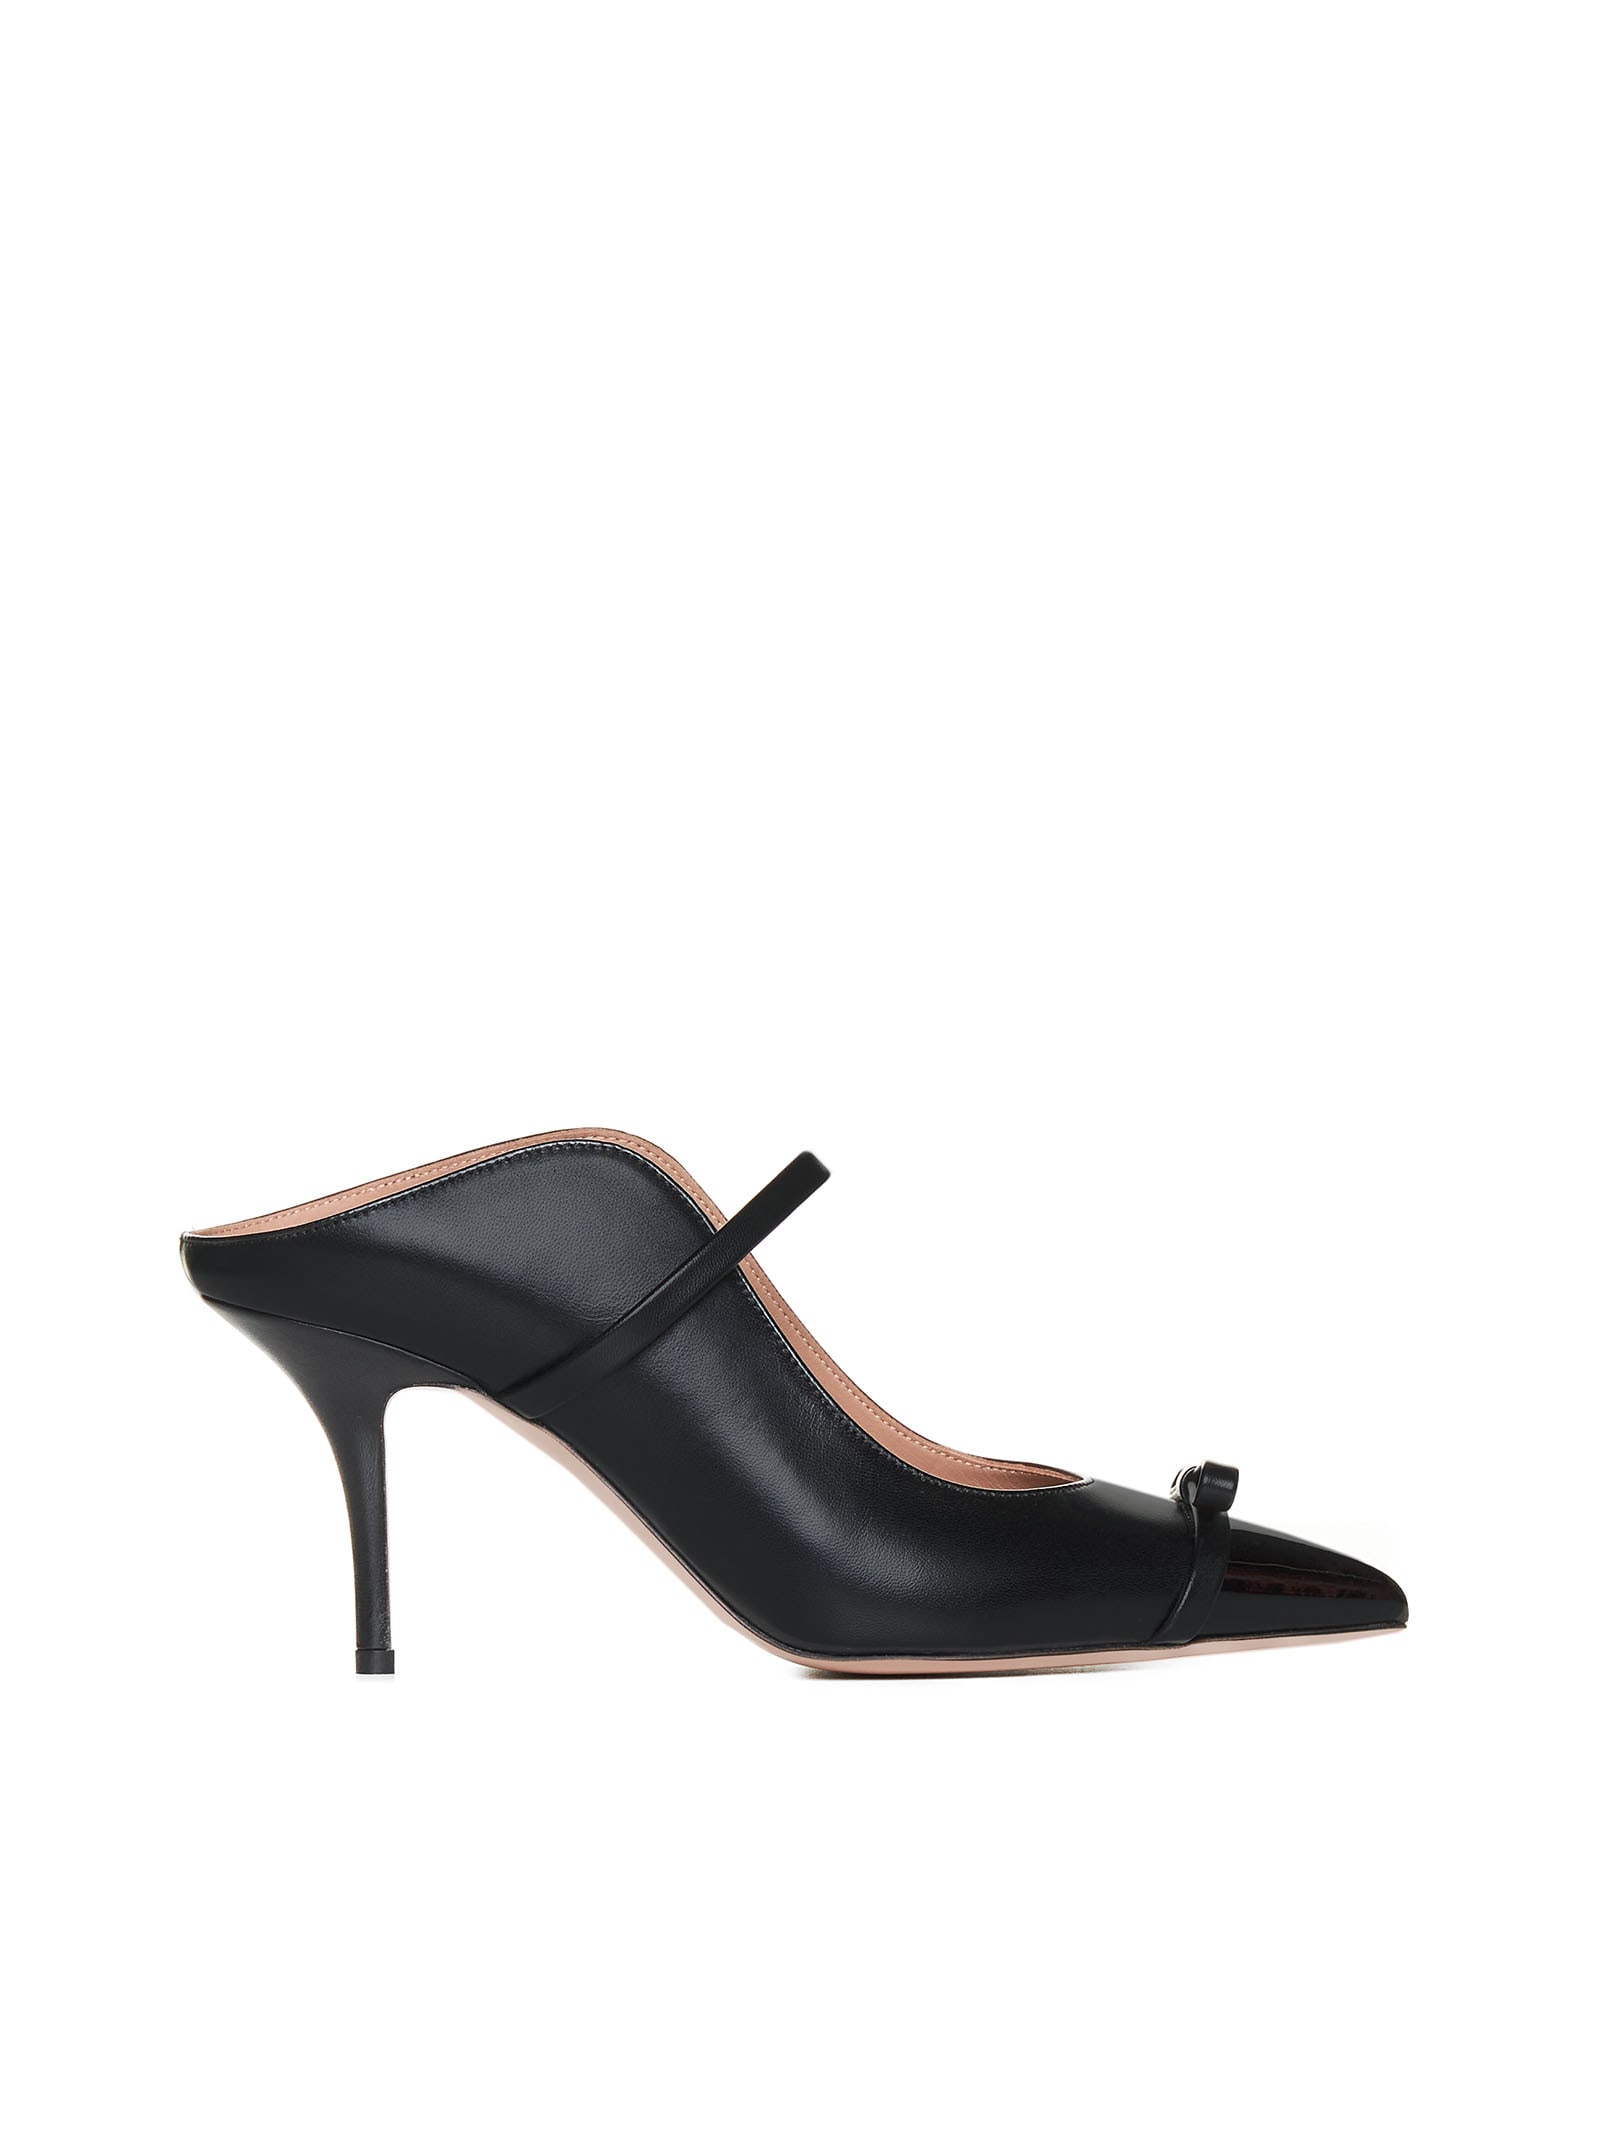 Malone Souliers Flat Shoes In Black Black